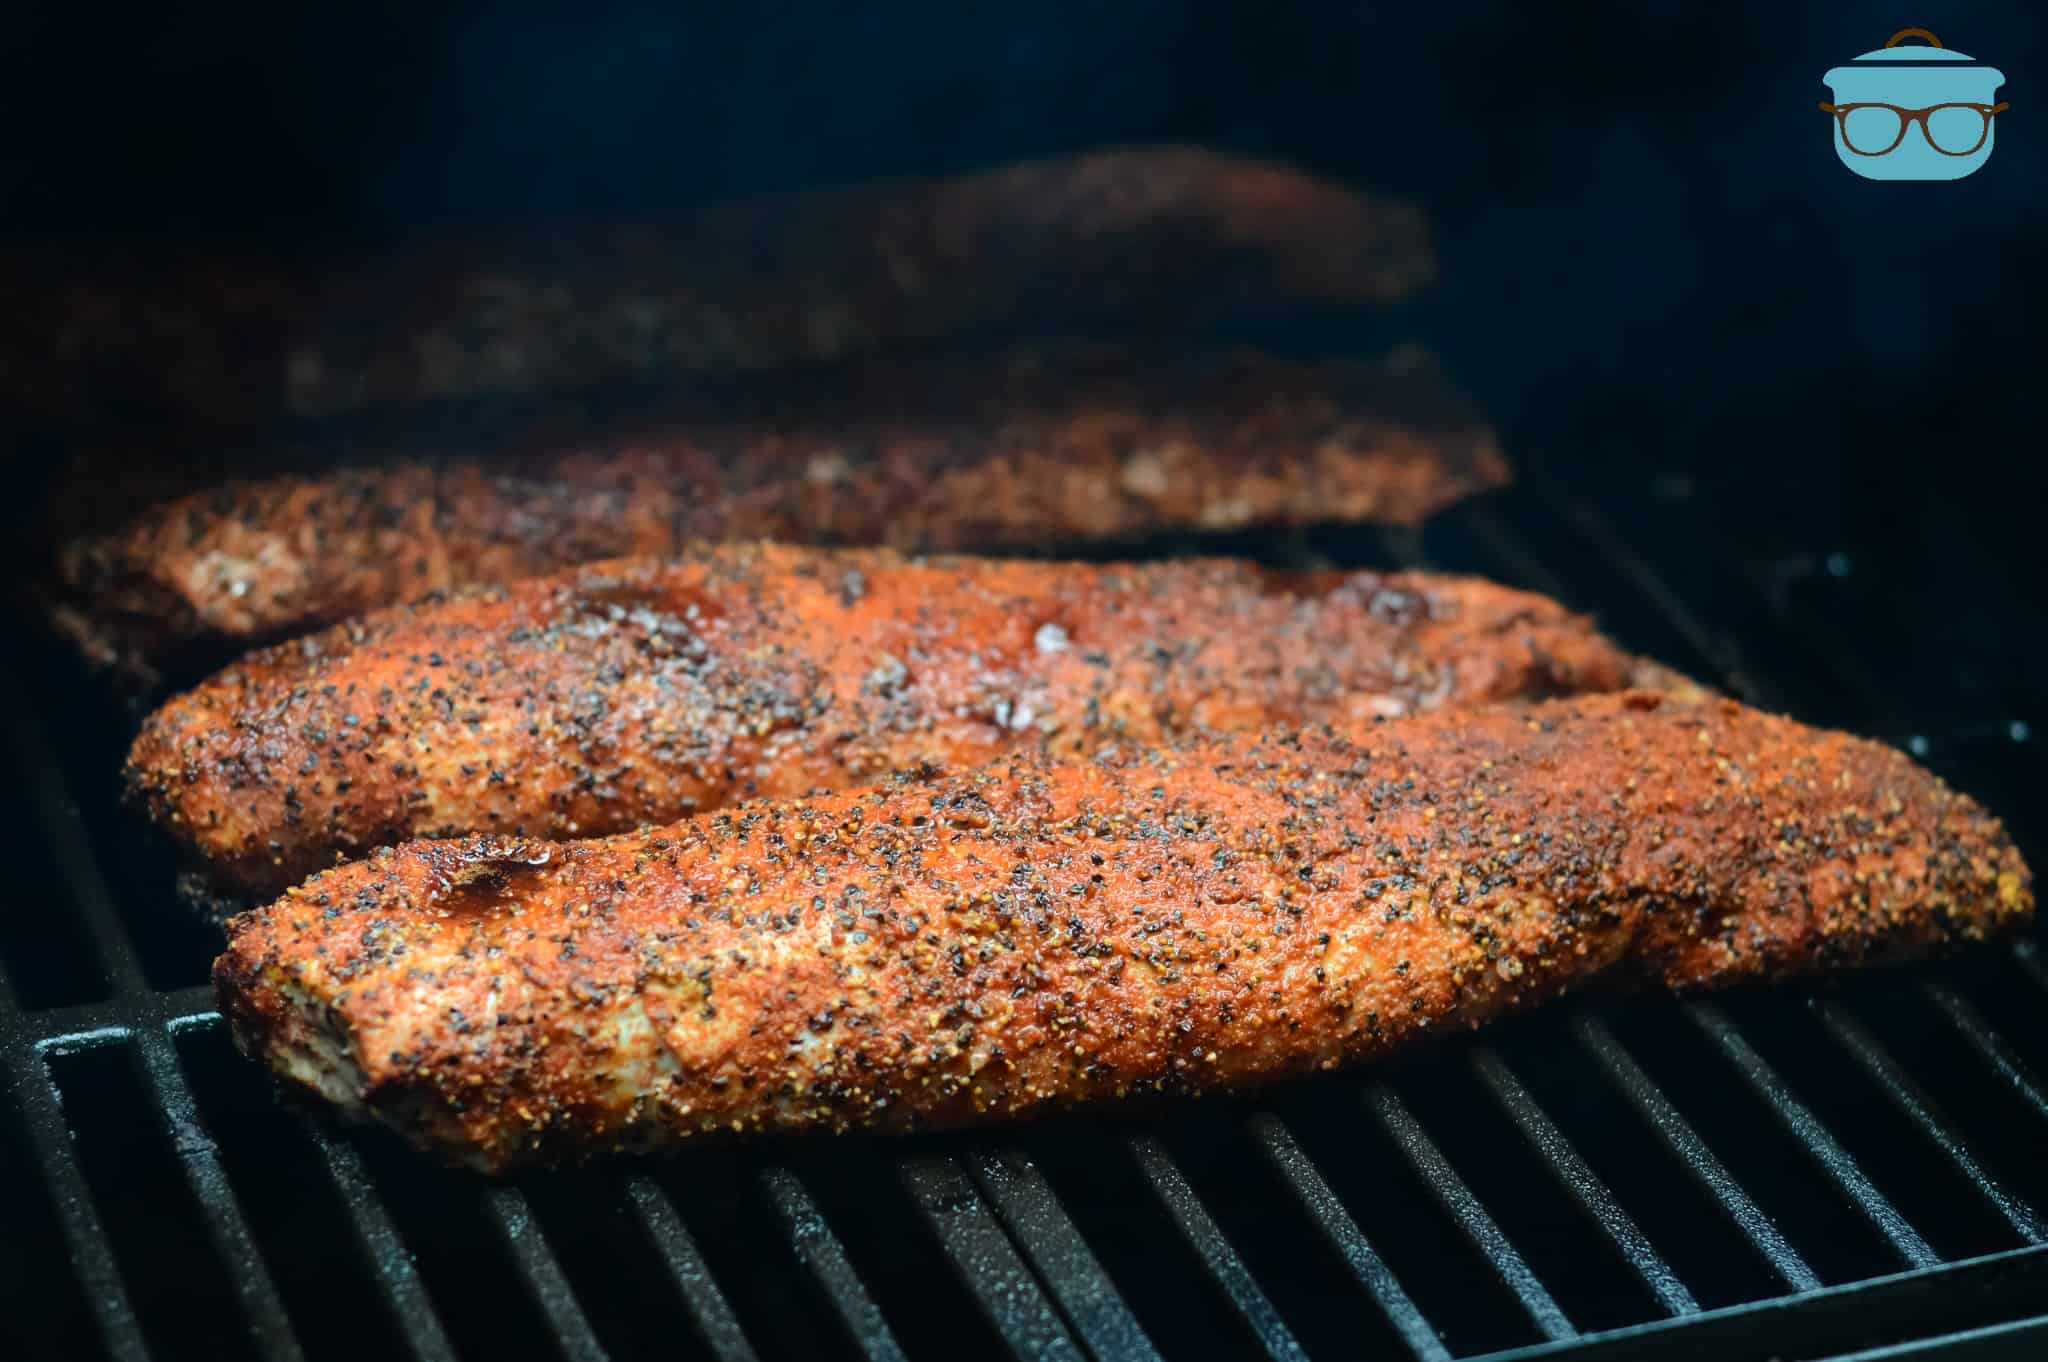 four pieces of seasoned potk tenderloing being smoked on a grill.